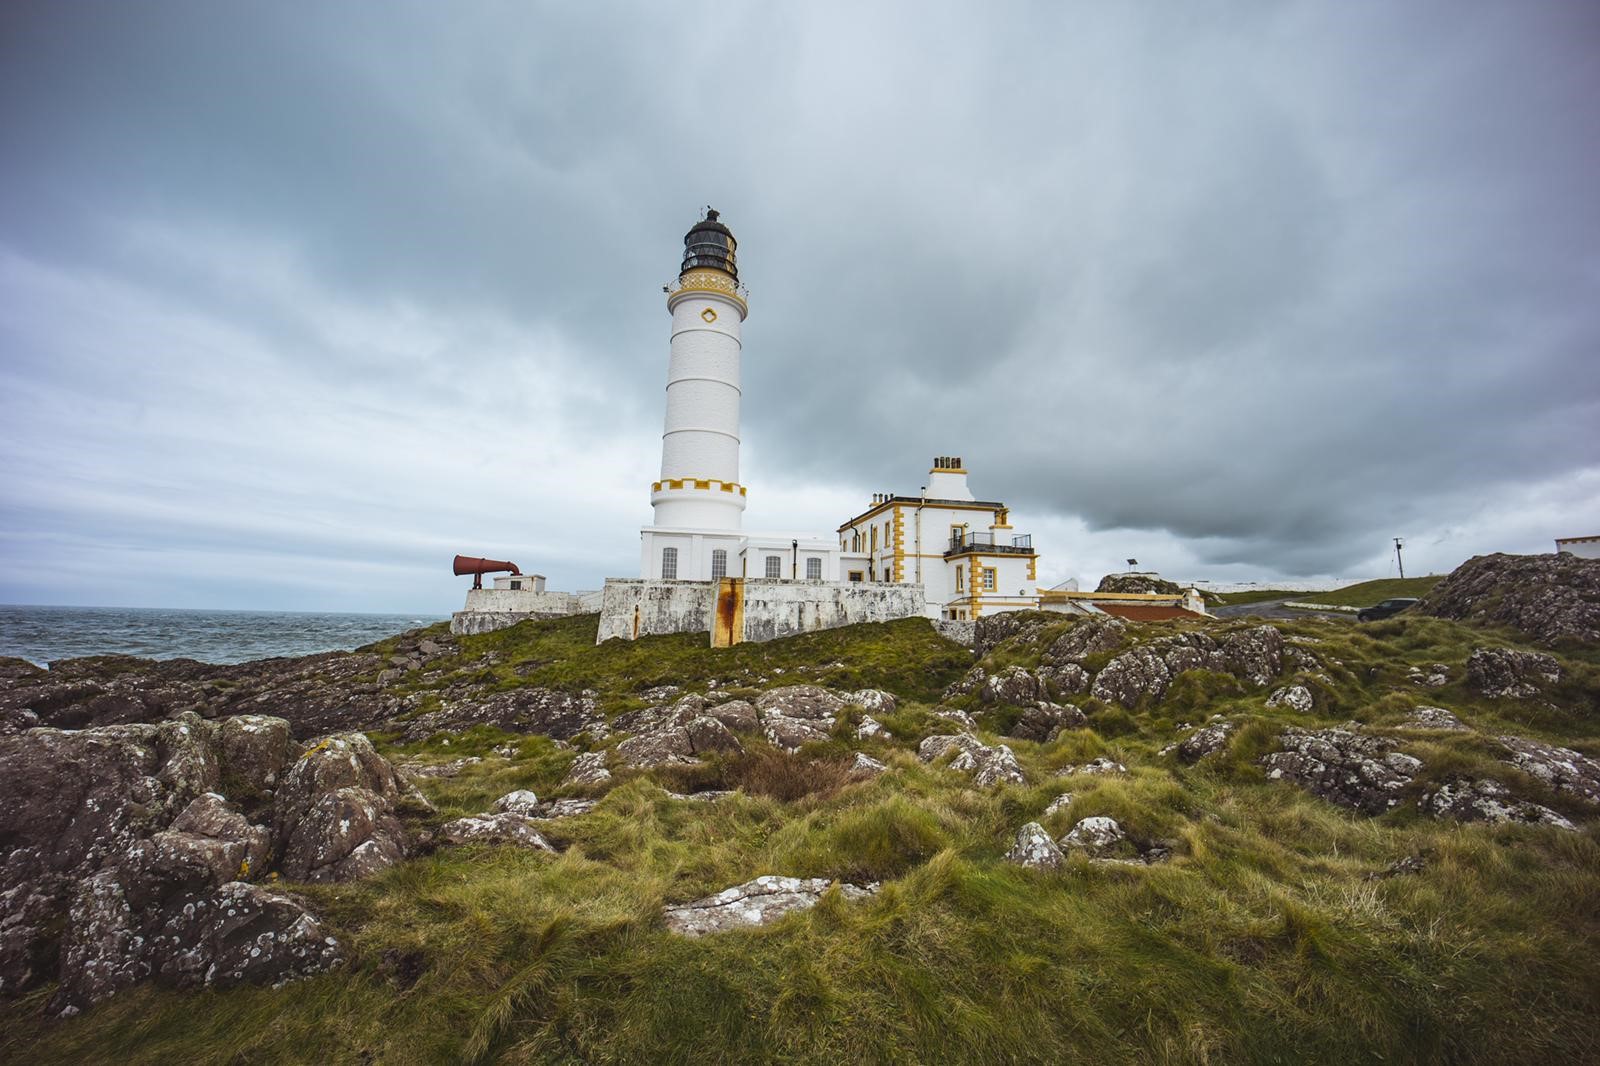 Lighthouses of the Rhins tour includes Corsewall Lighthouse, which is now a hotel.